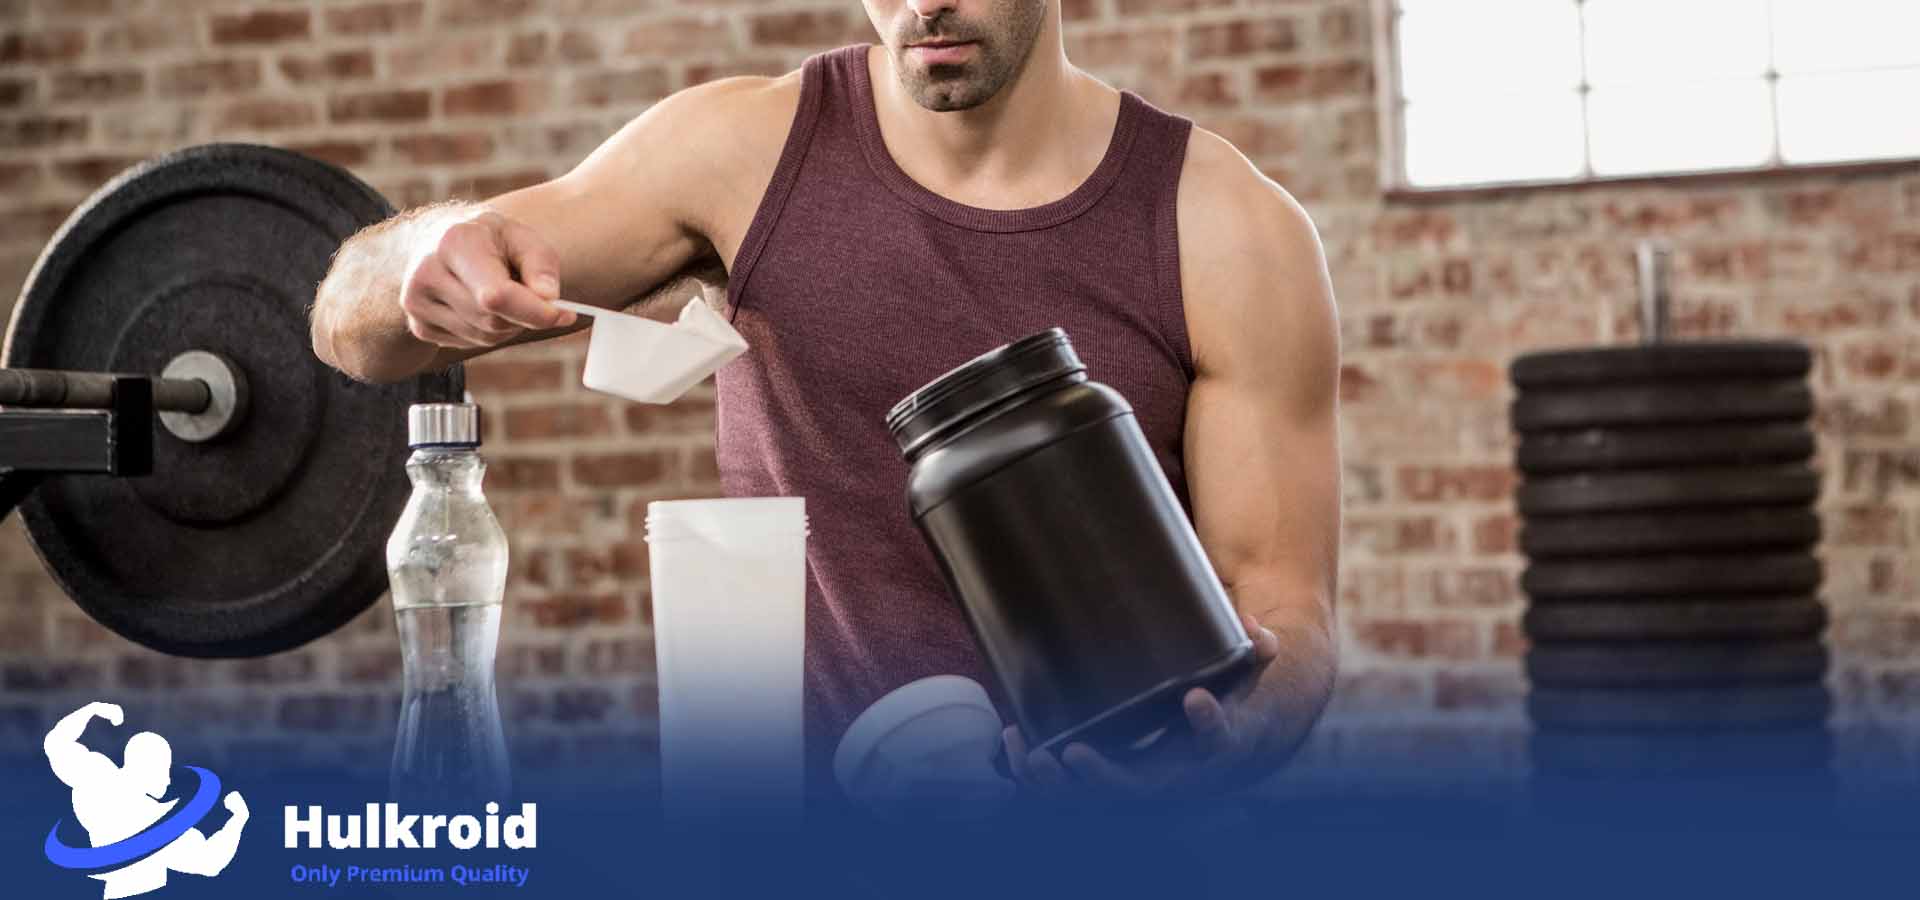 The best muscle building supplements